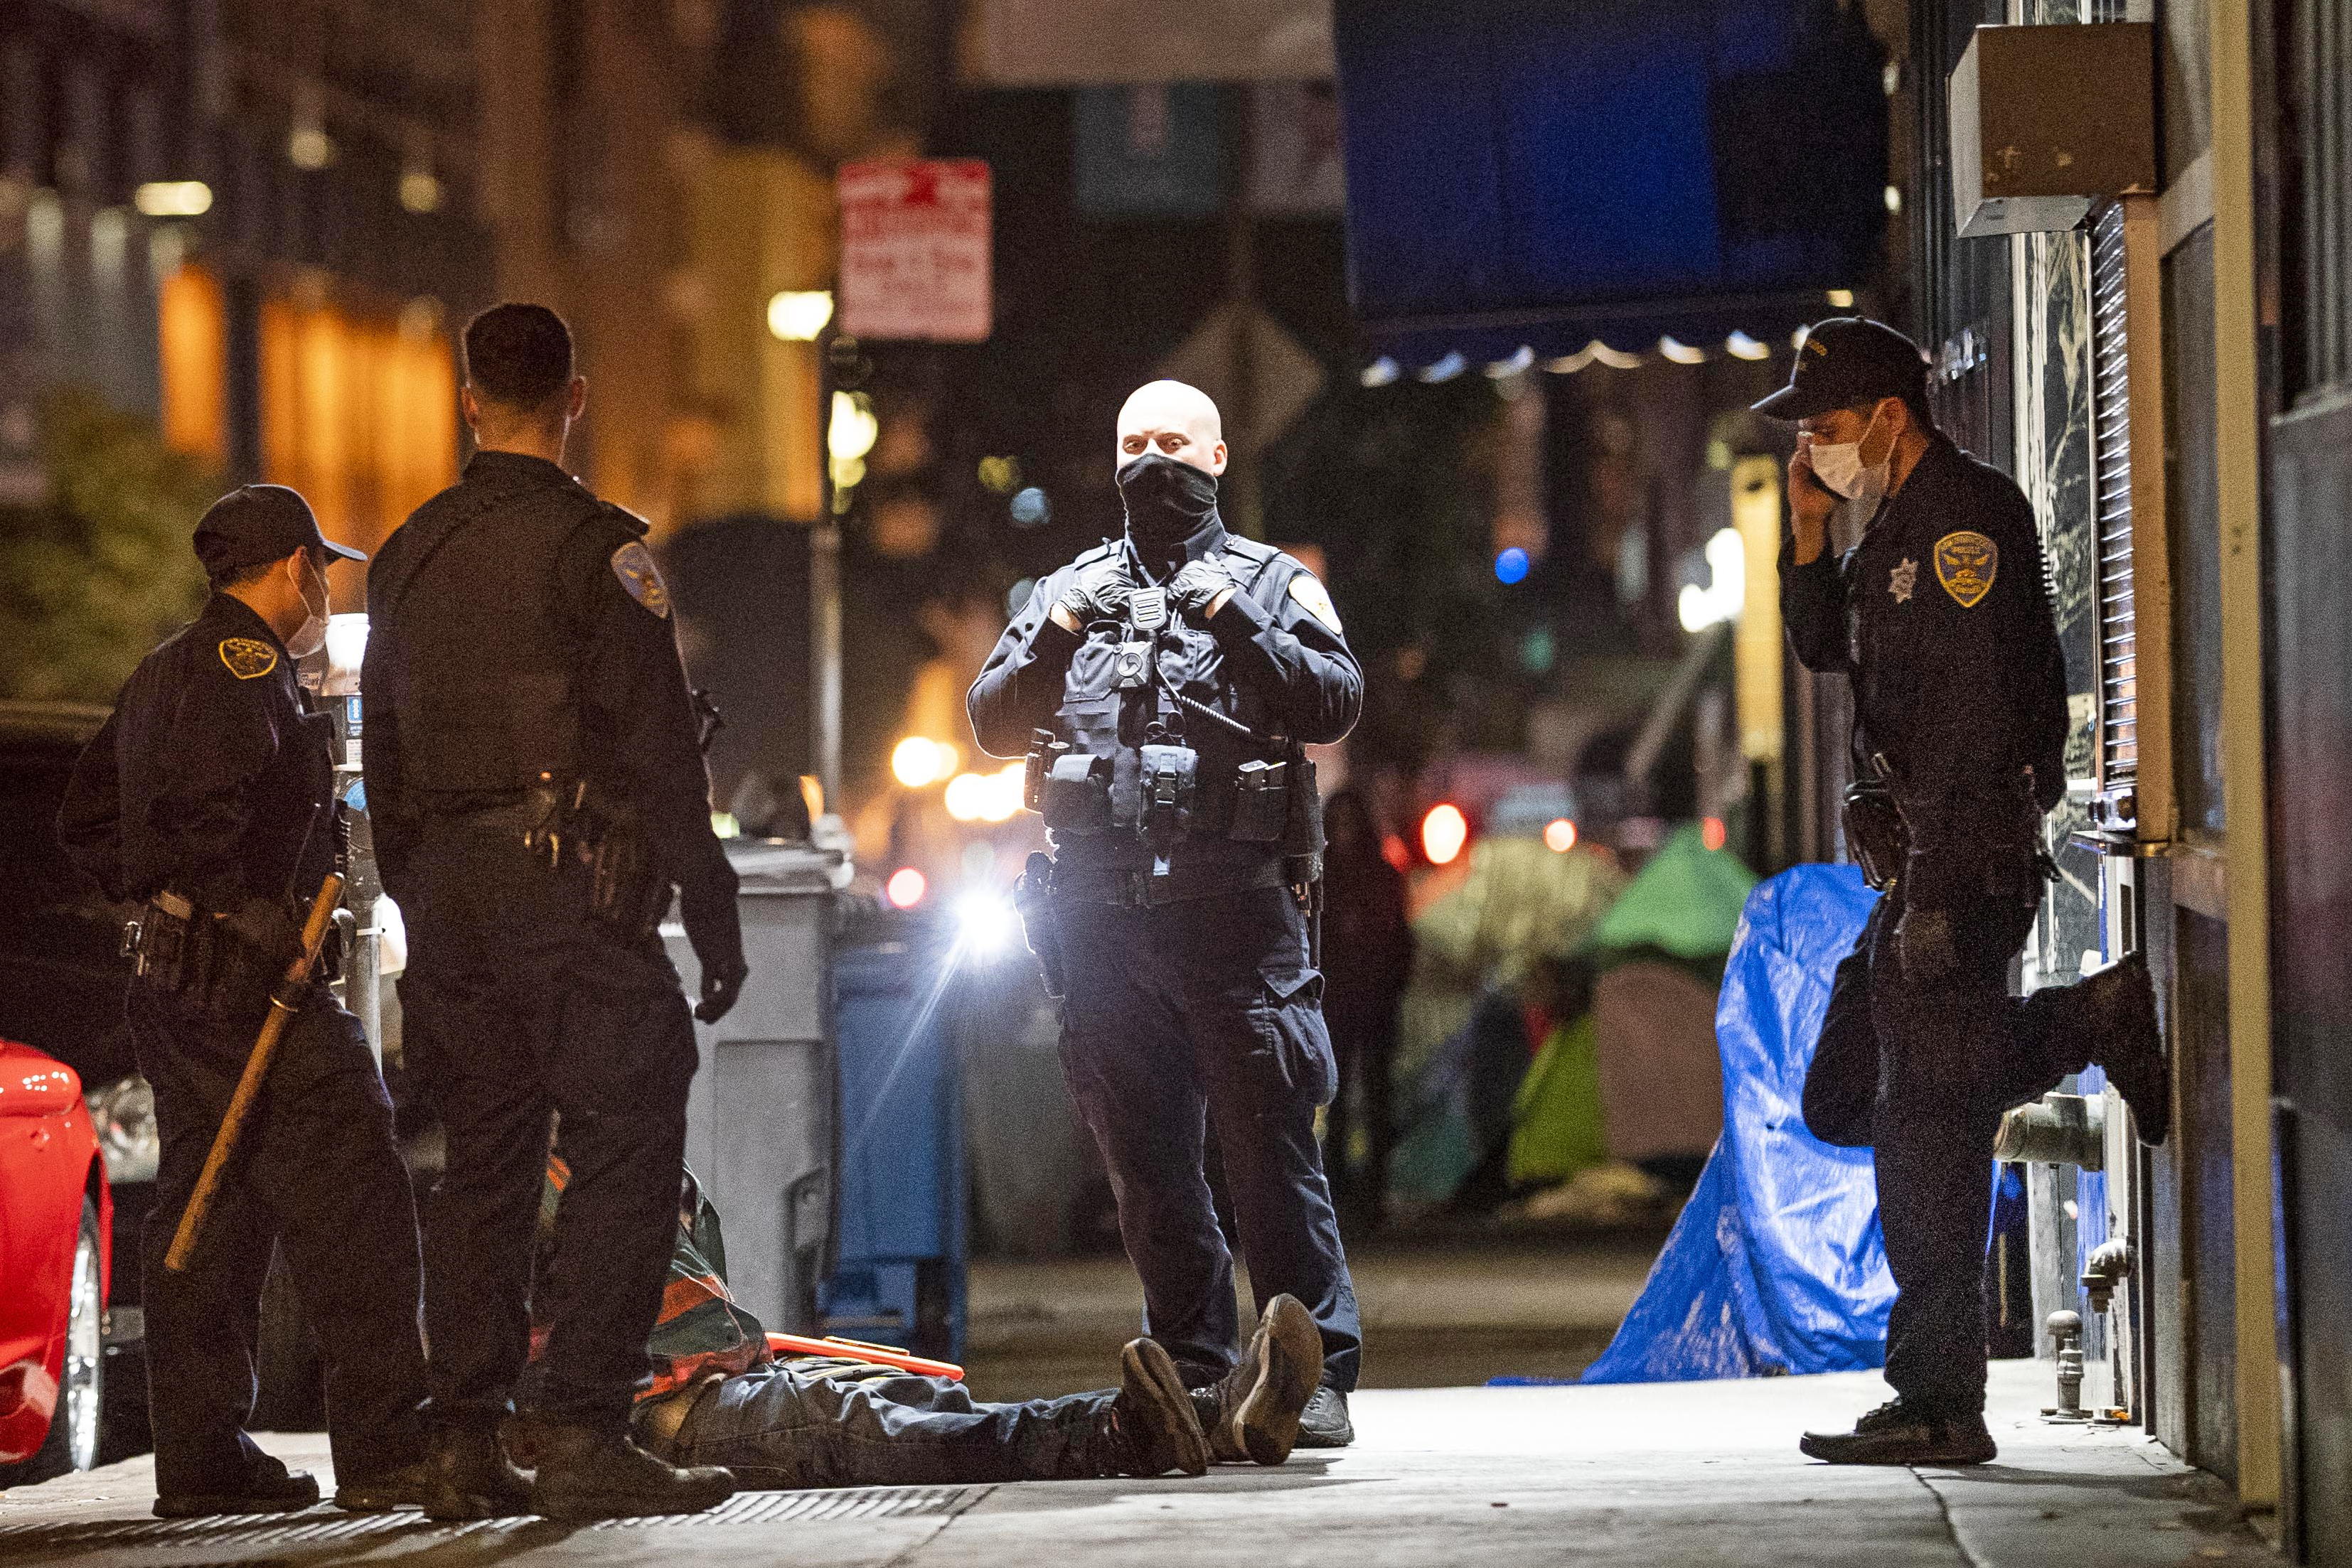 Police officers at a nighttime crime scene with a body covered by a tarp on the sidewalk.